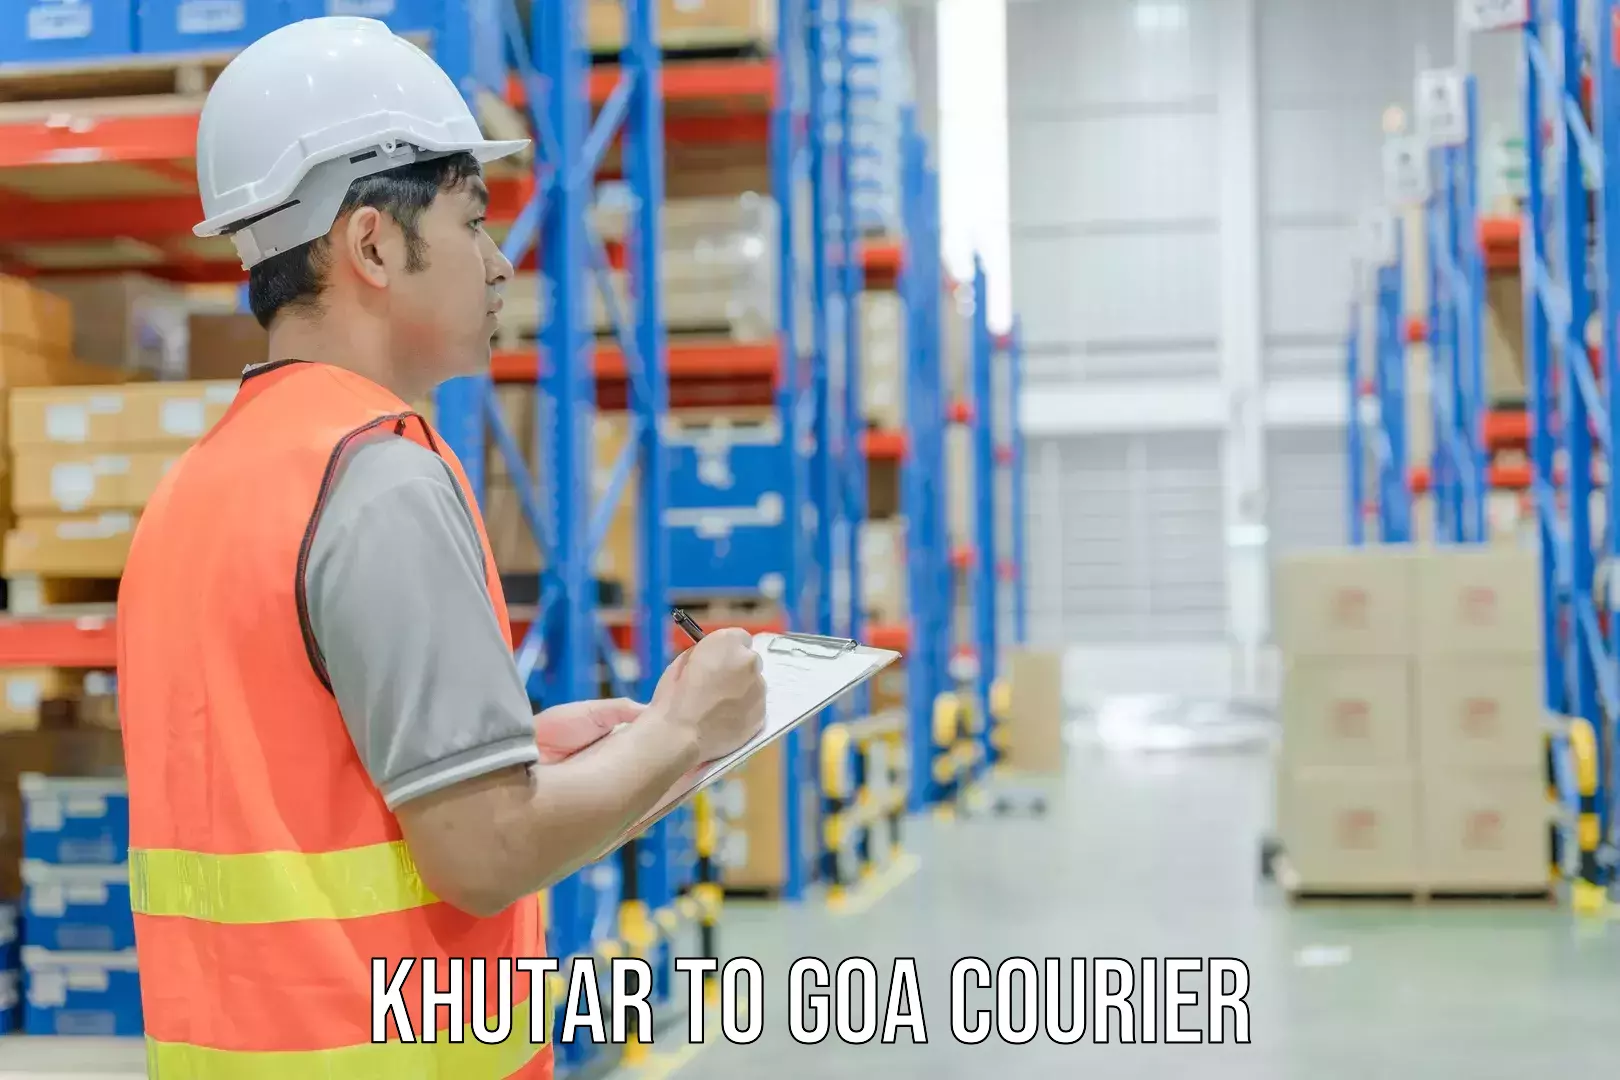 Courier service comparison in Khutar to Mormugao Port